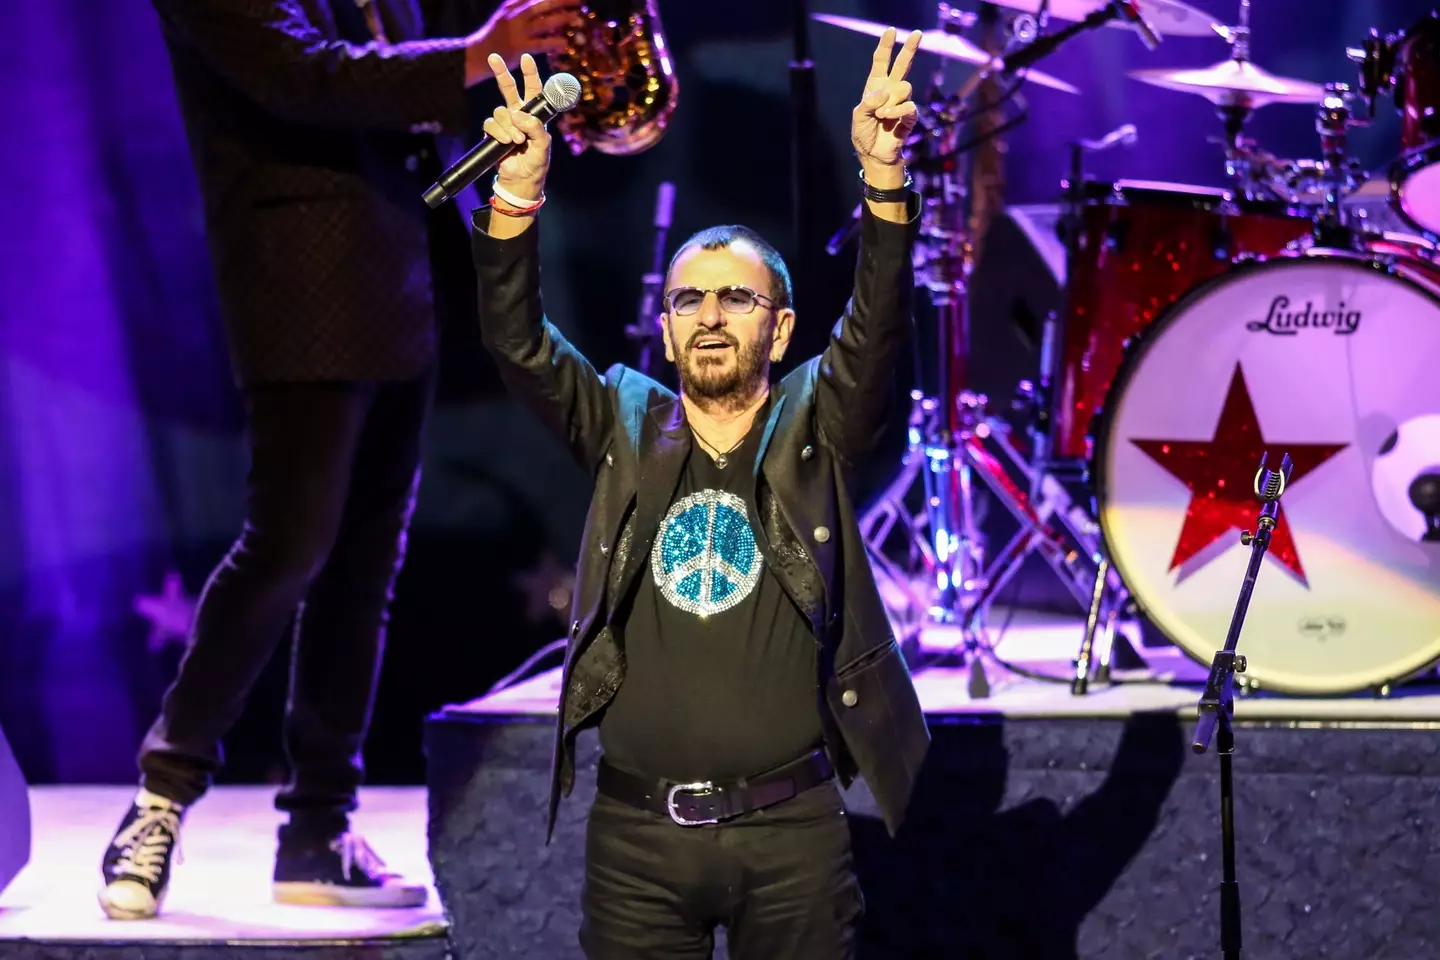 Ringo Starr, legendary drummer for The Beatles, will also be in the film.